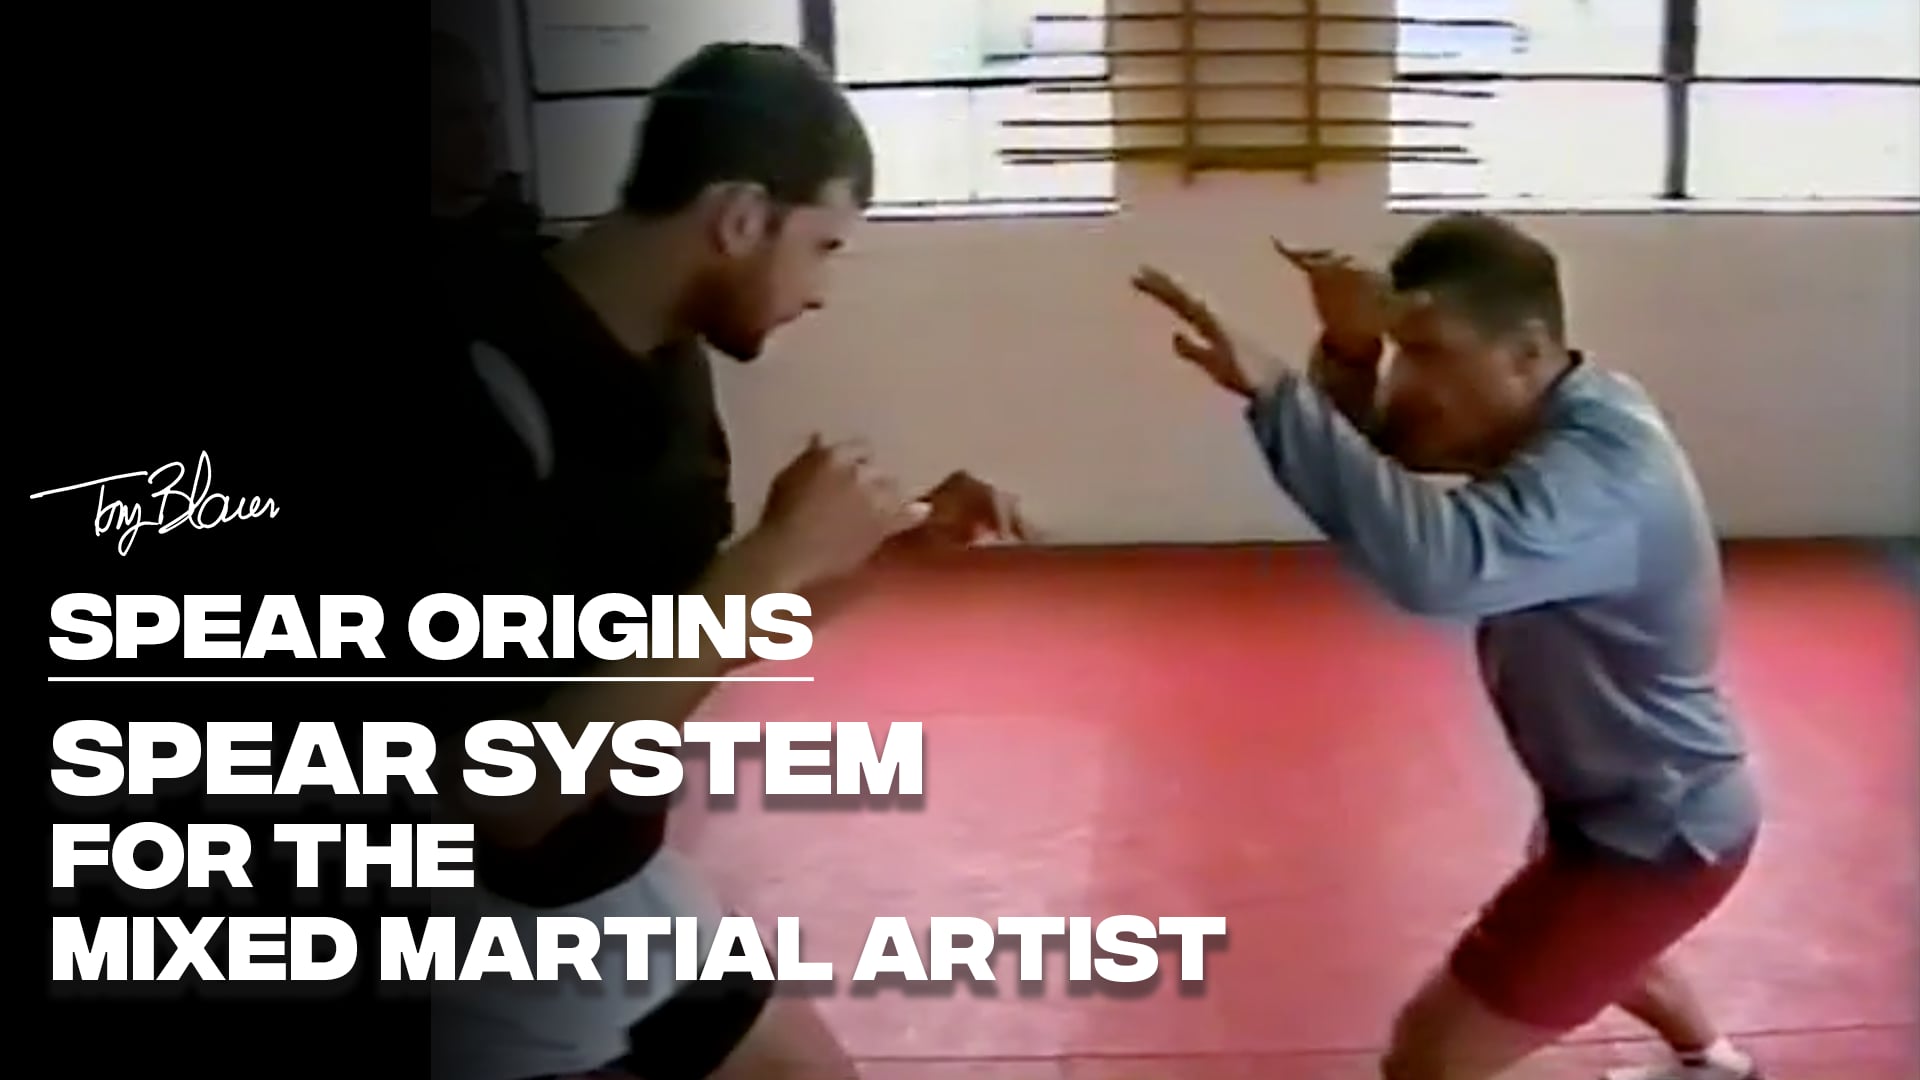 Watch SPEAR SYSTEM FOR THE MIXED MARTIAL ARTIST Online Vimeo On Demand on Vimeo